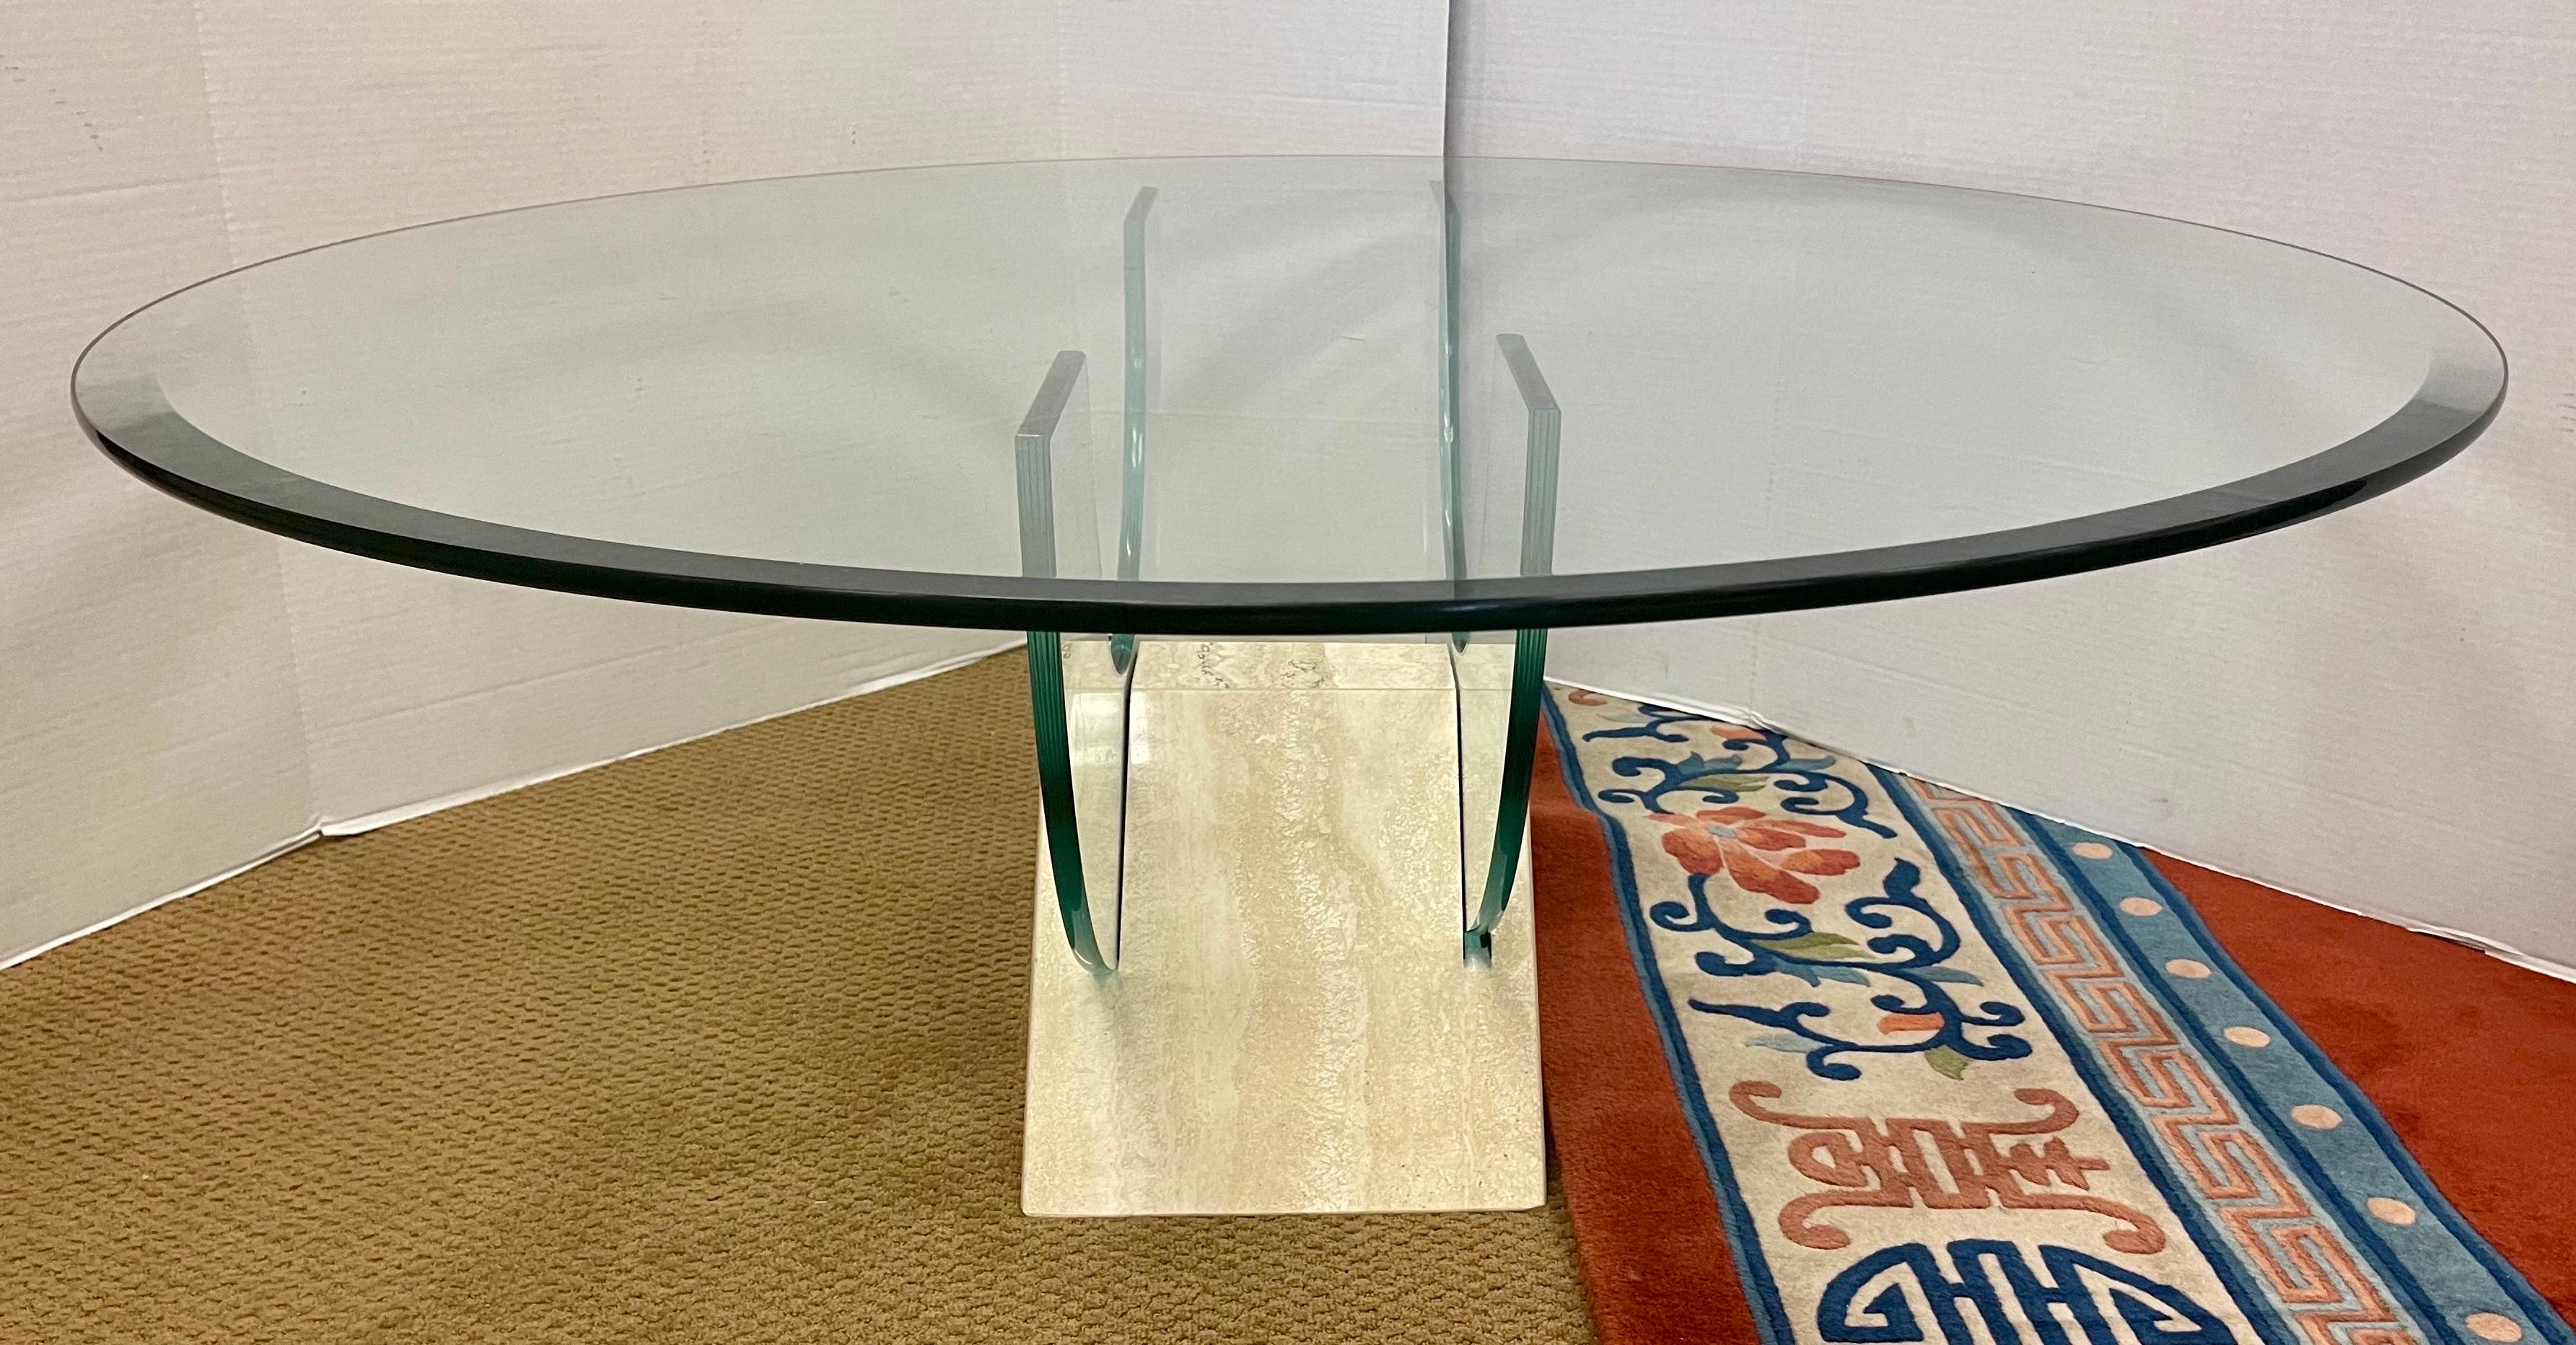 Magnificent, made in Italy (with hallmark on bottom) post modern round glass and carrara marble cocktail table. There are two pieces of slotted glass that fit into a luxurious sculpted piece of carrara marble that form the base and the 42